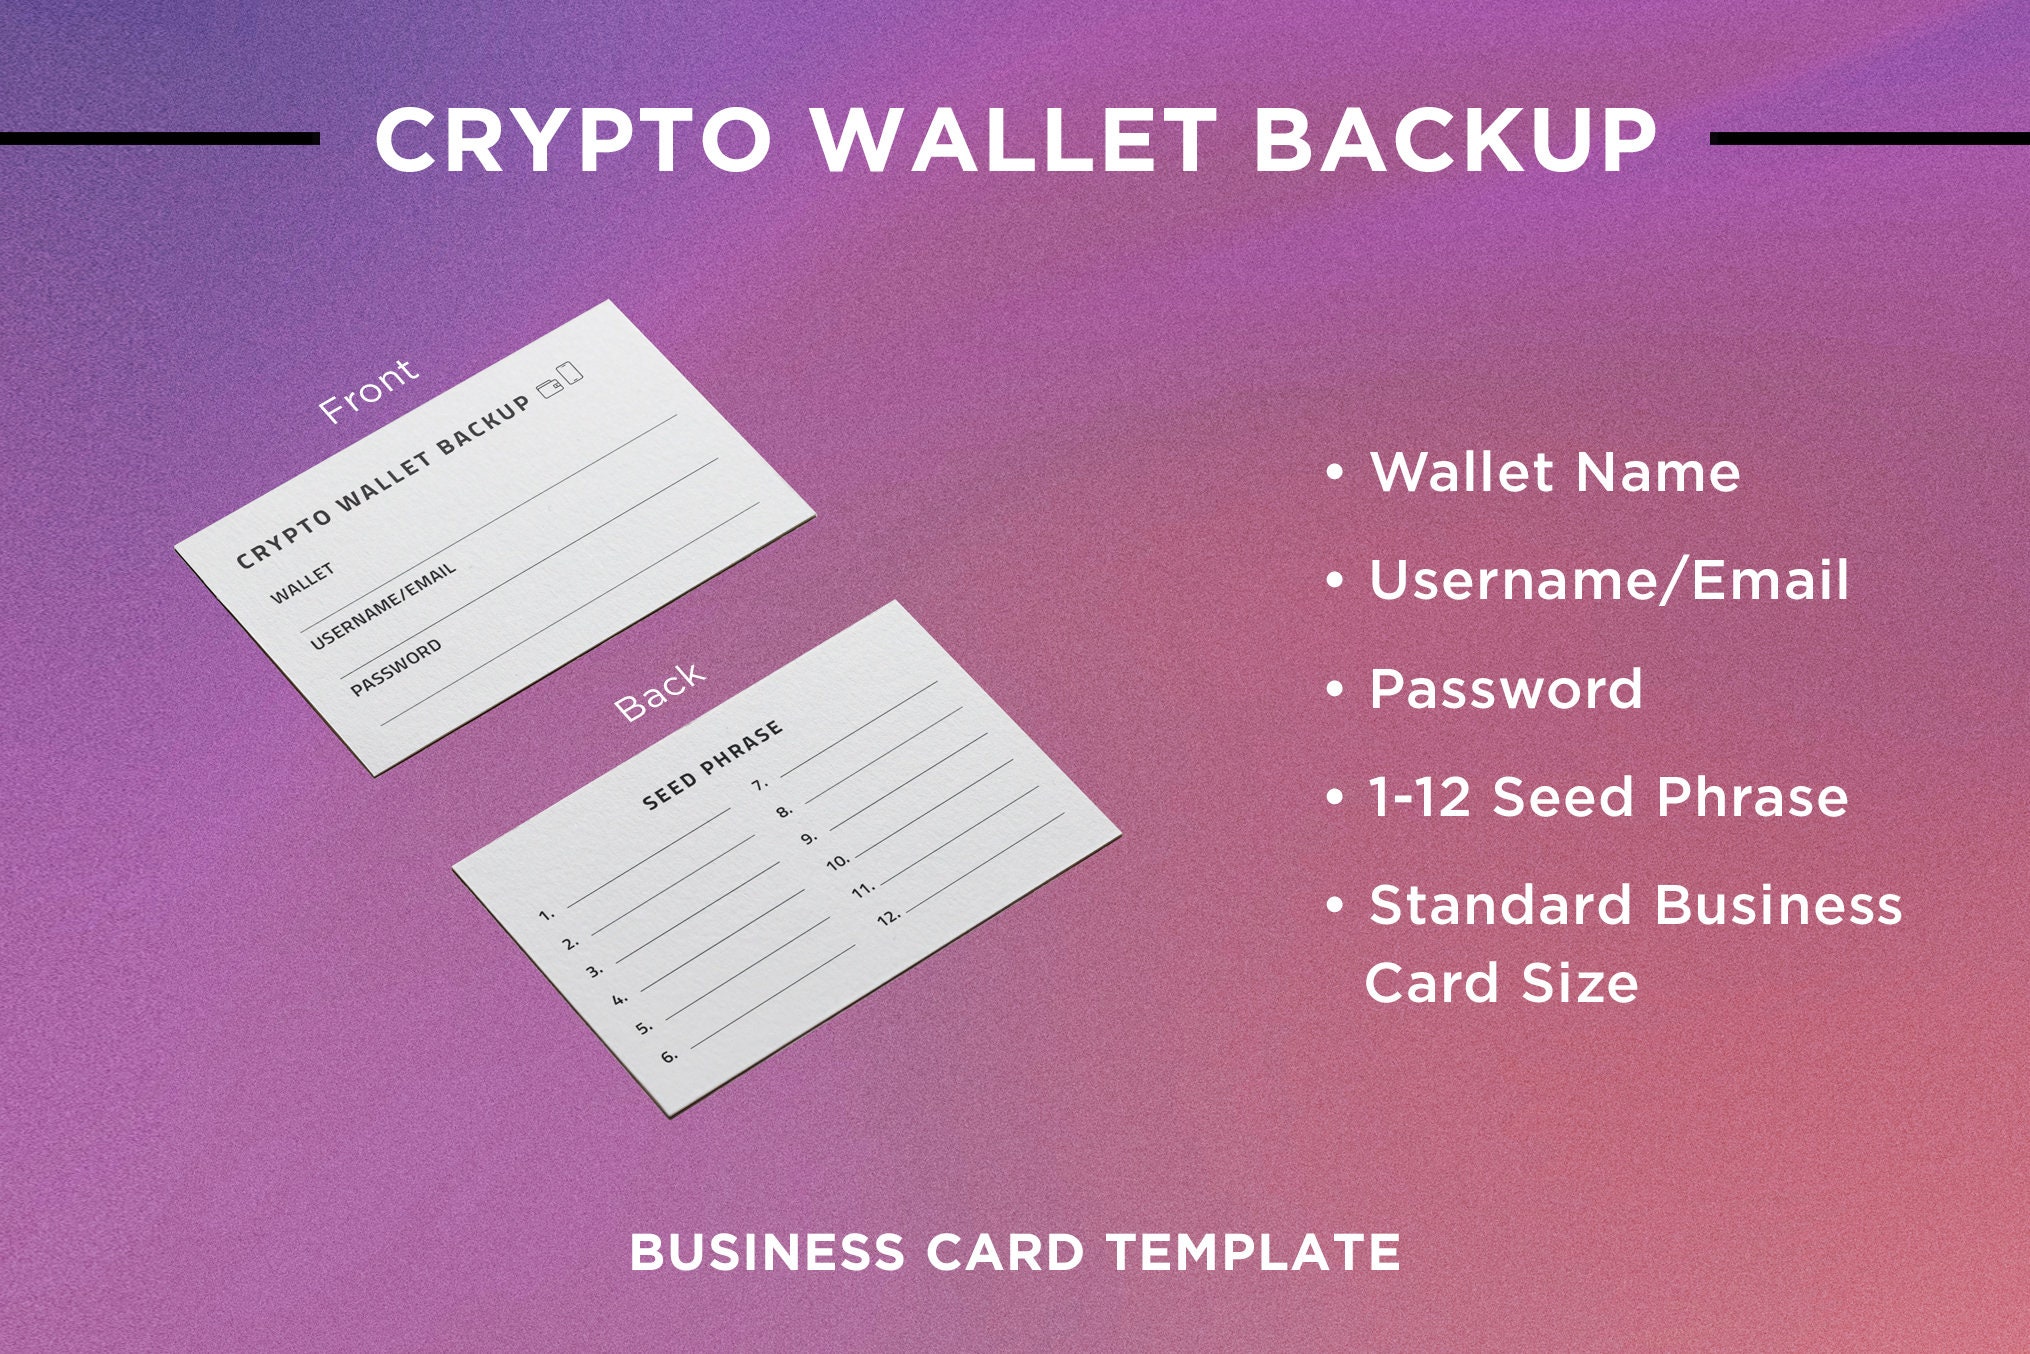 File:Seed-phrase-wallet-backup-template.png - Wikimedia Commons